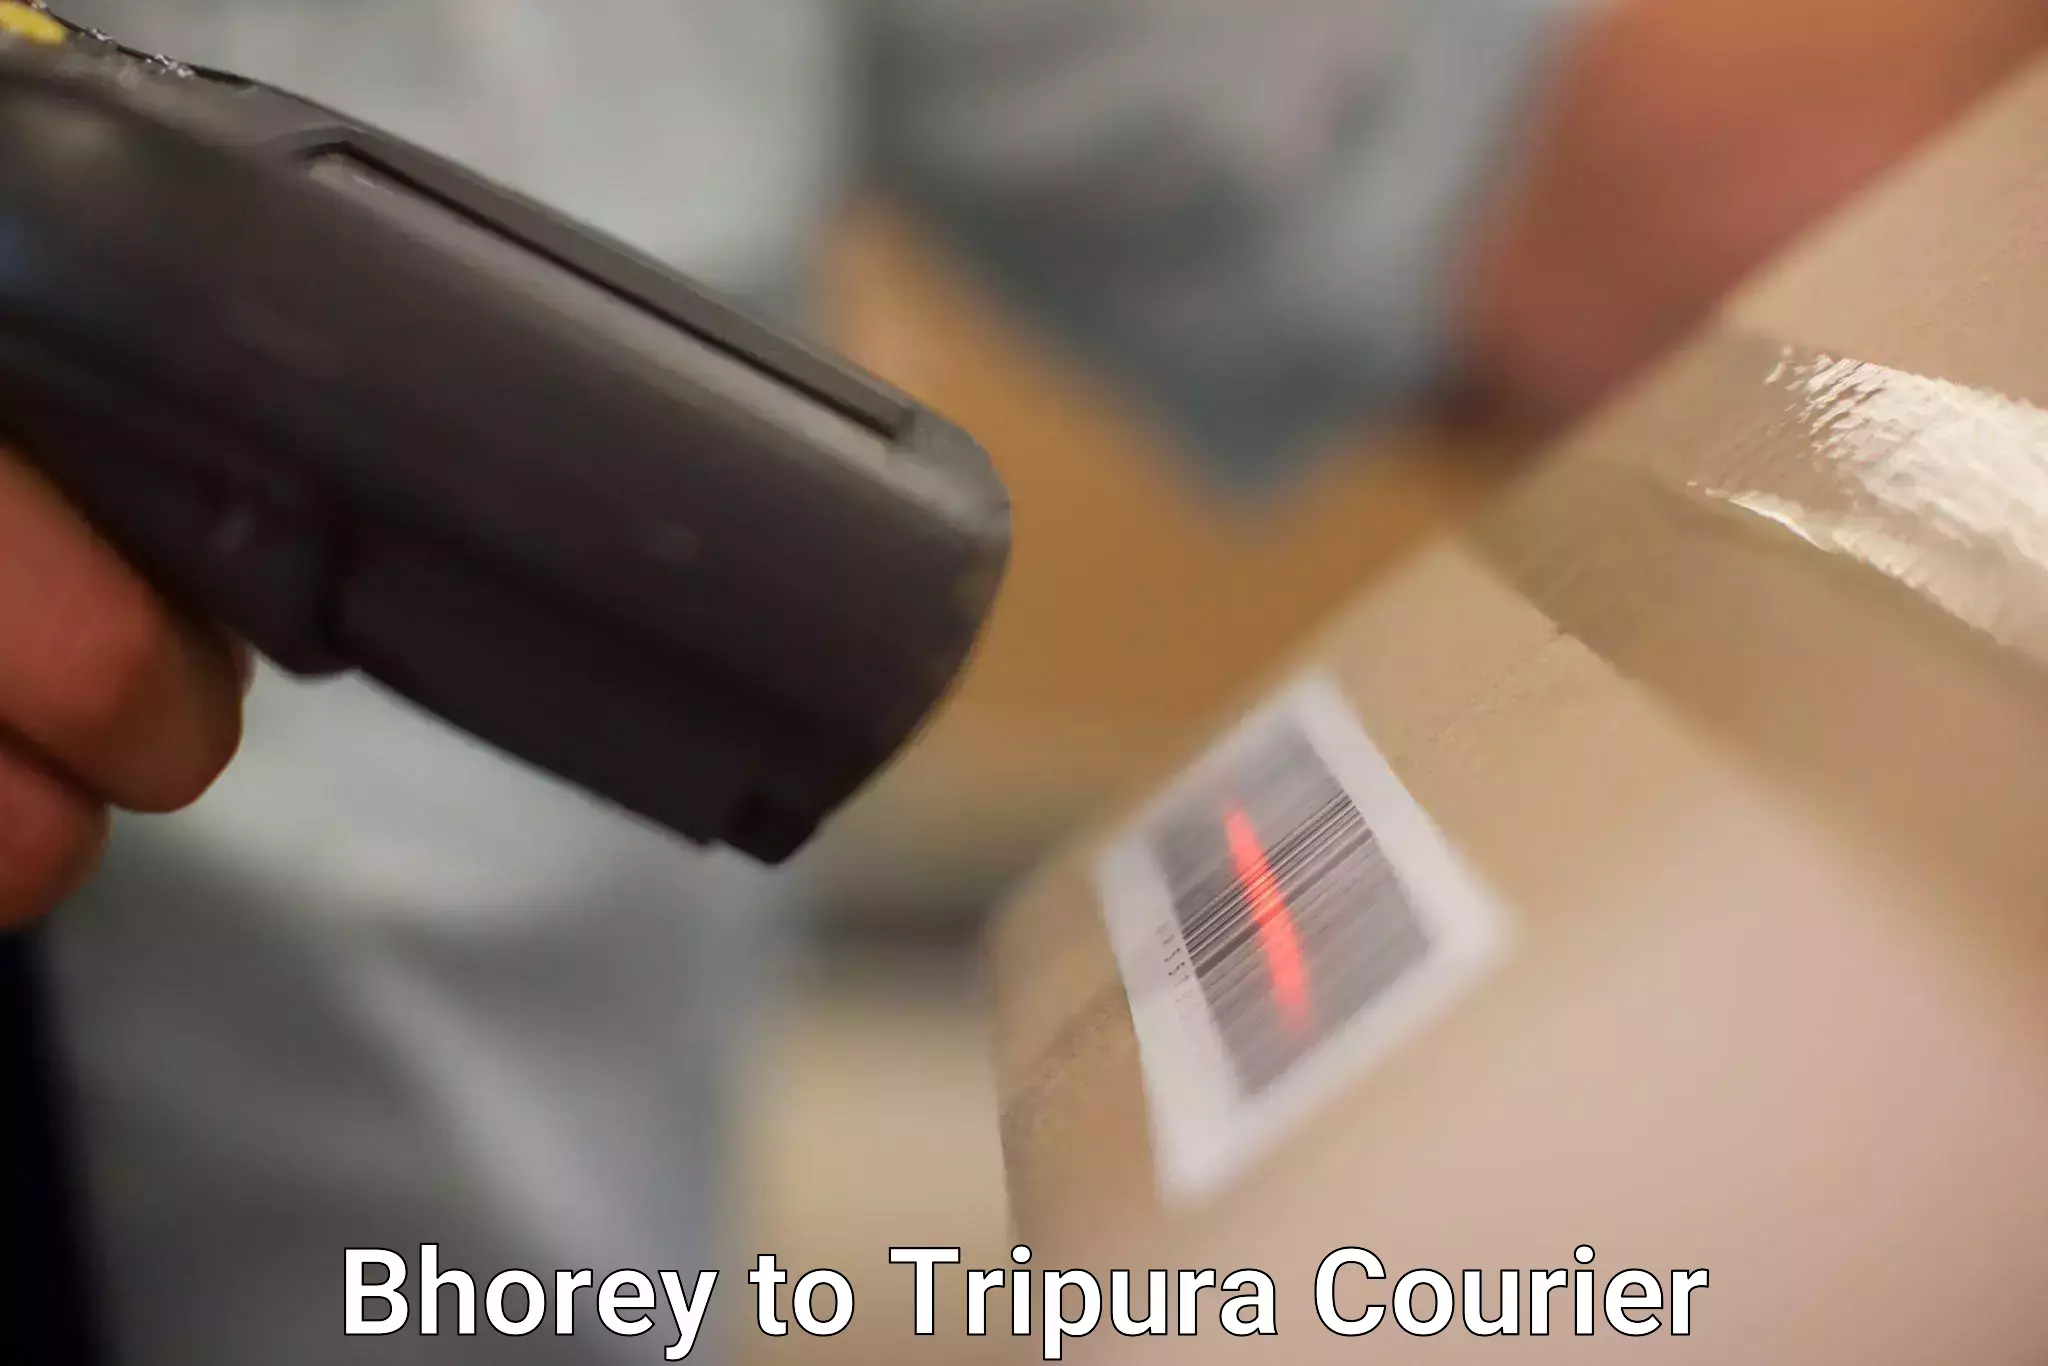 On-demand delivery Bhorey to Udaipur Tripura